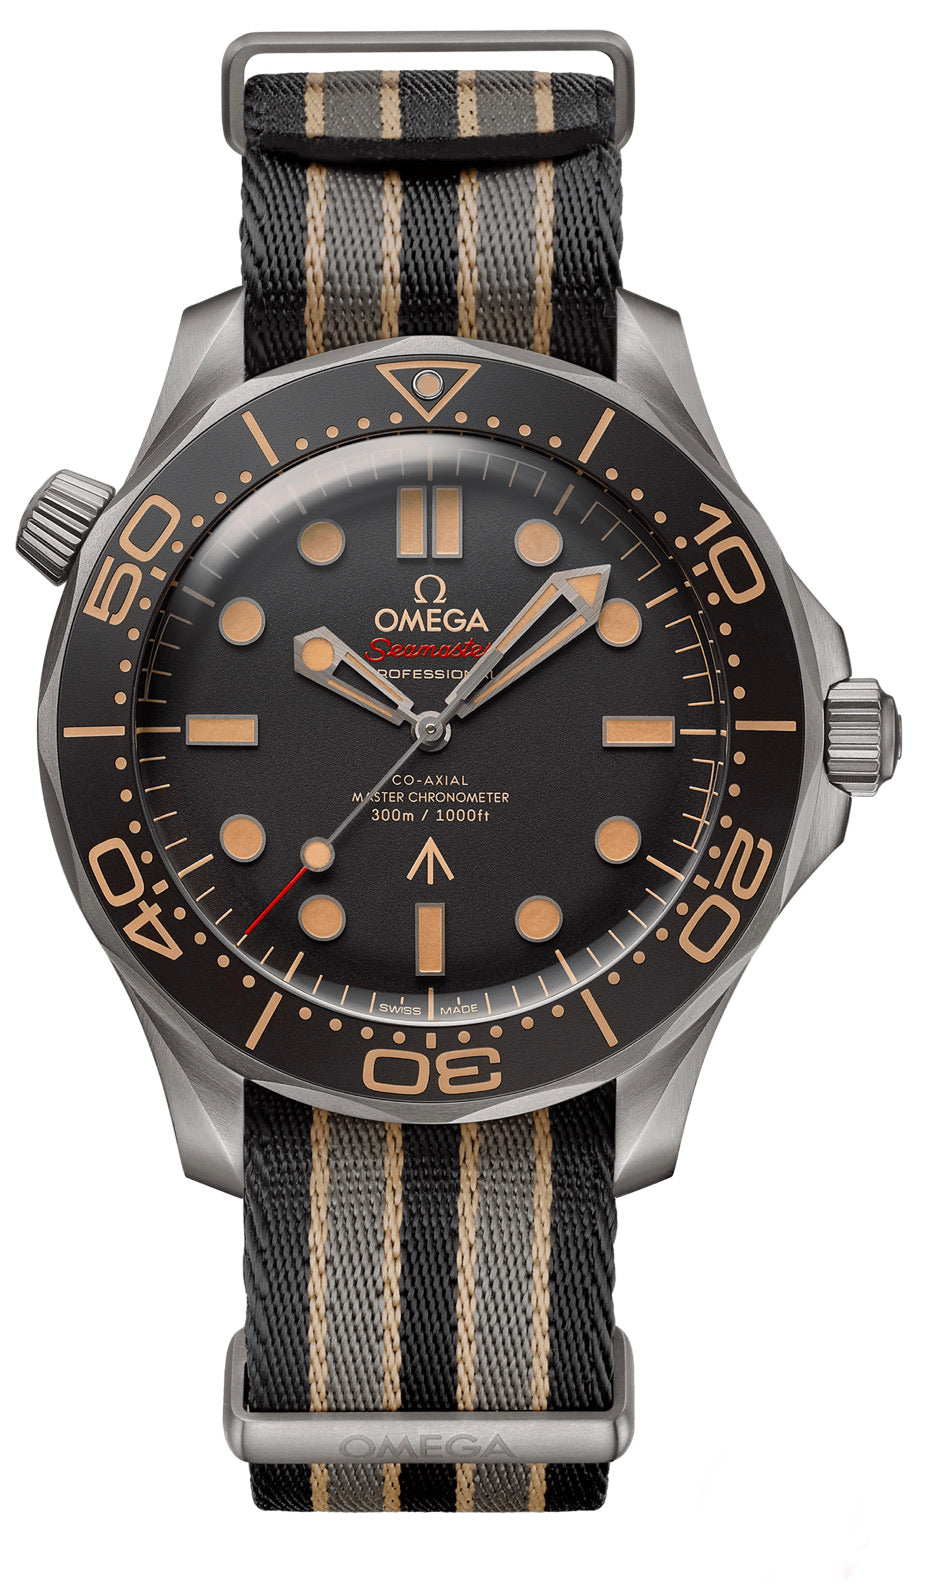 Omega 007 Edition "No Time to Die" Seamaster DIVER 300M OMEGA 42MM 210.92.42.20.01.001